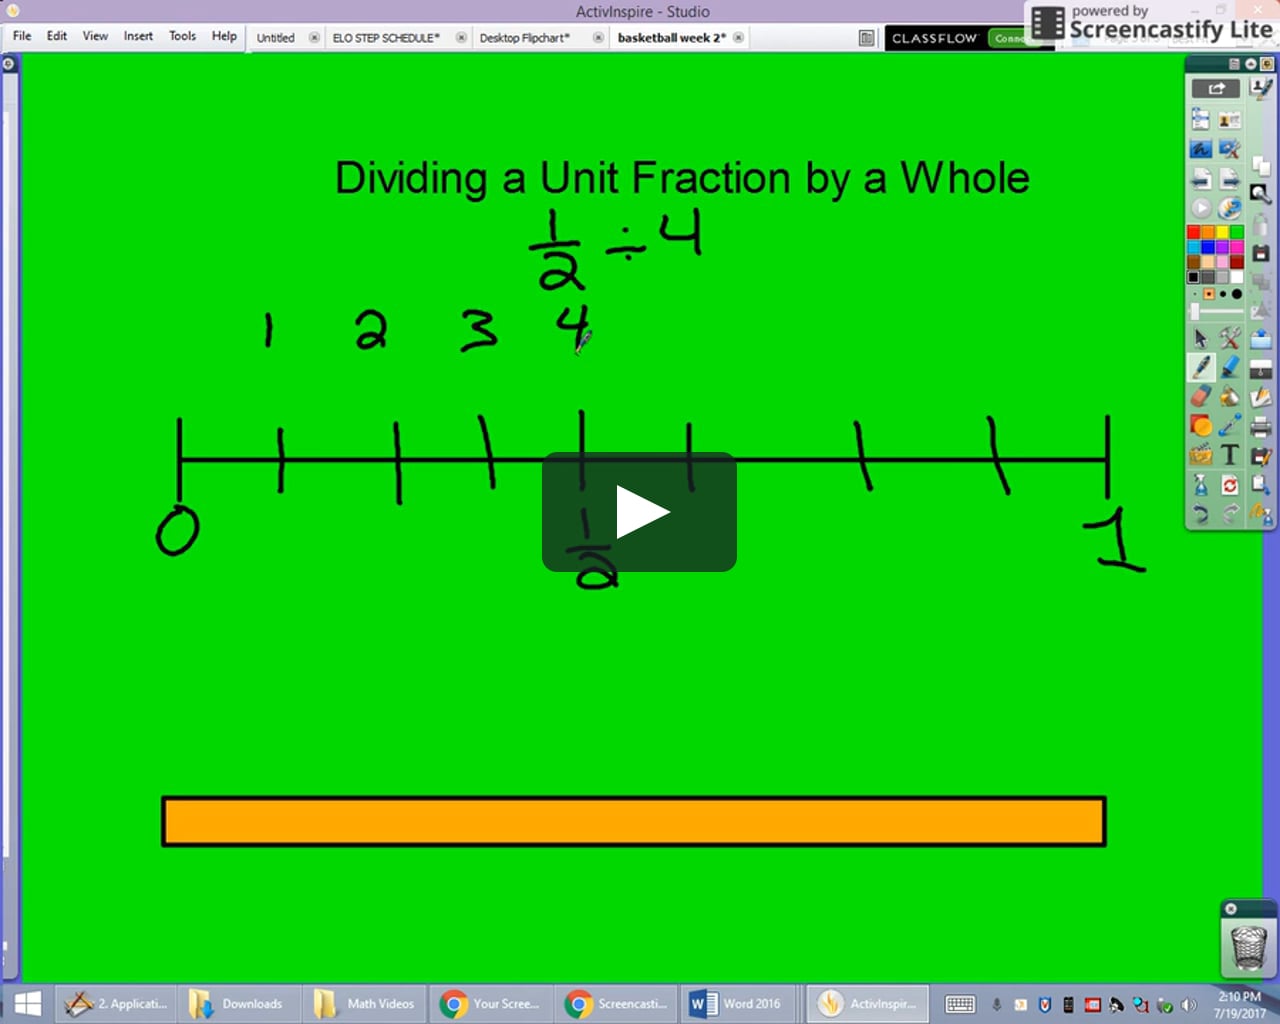 using-a-number-line-to-divide-a-unit-fraction-by-a-whole-number-on-vimeo